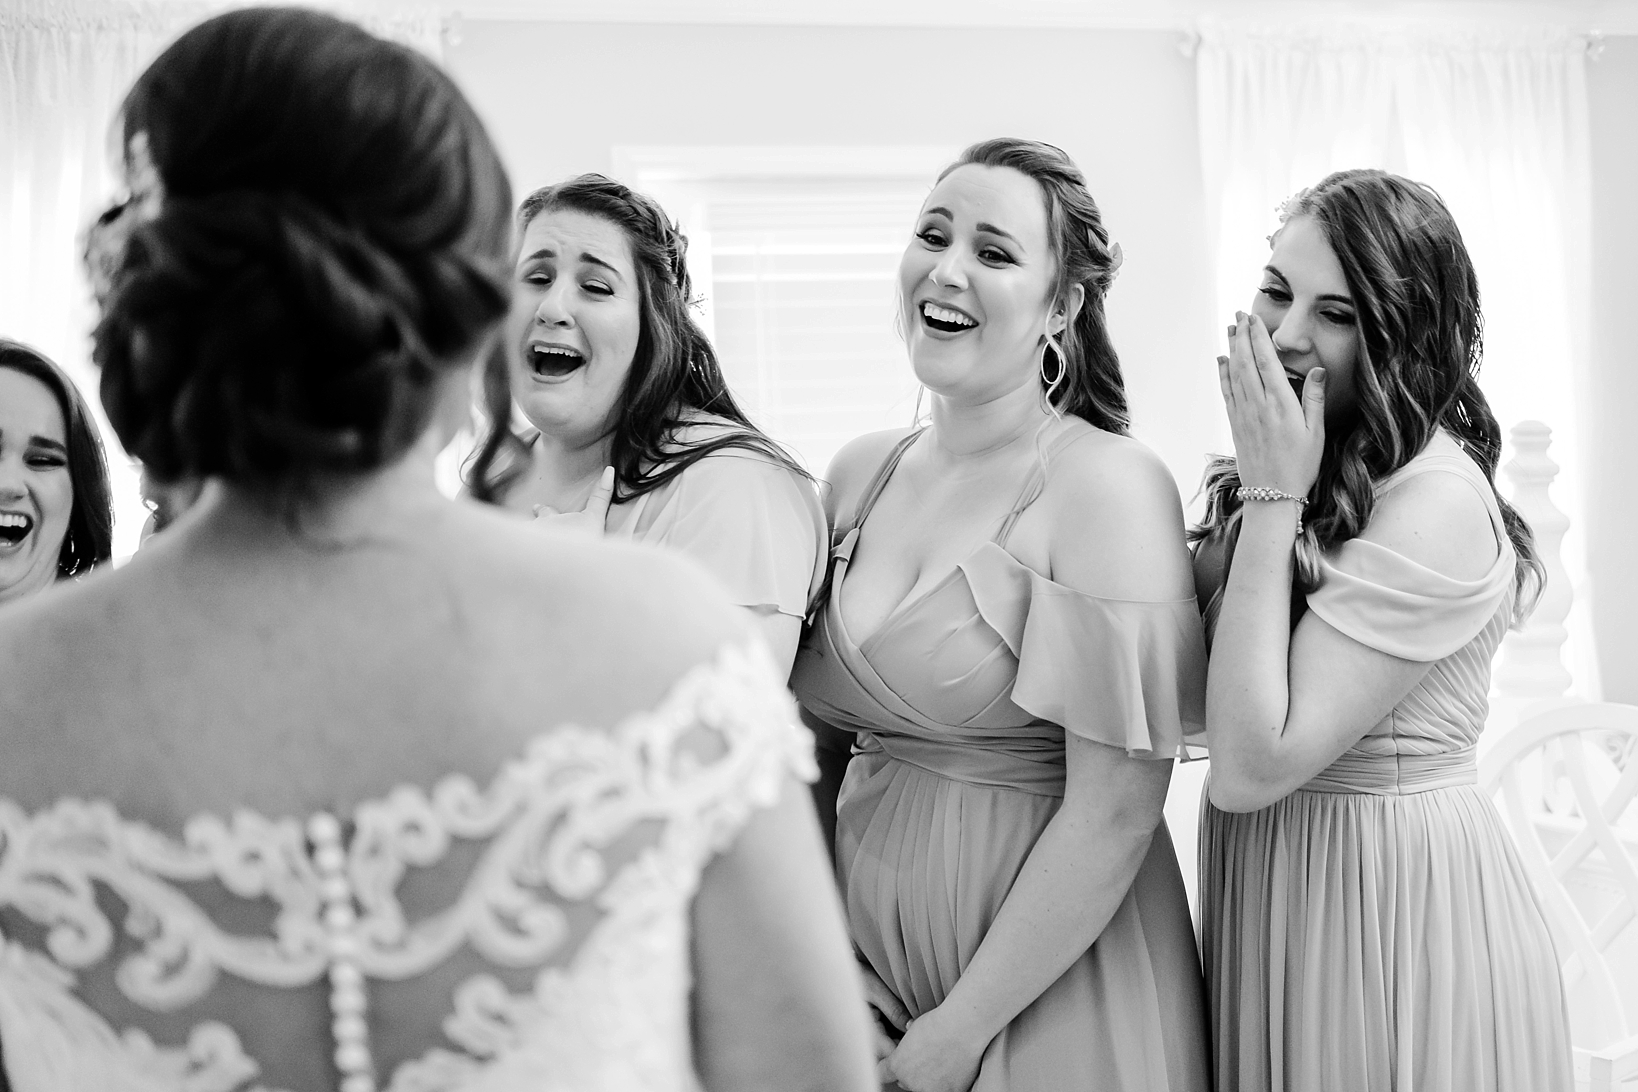 The Bridesmaids react to seeing their friend in her wedding dress for the first time